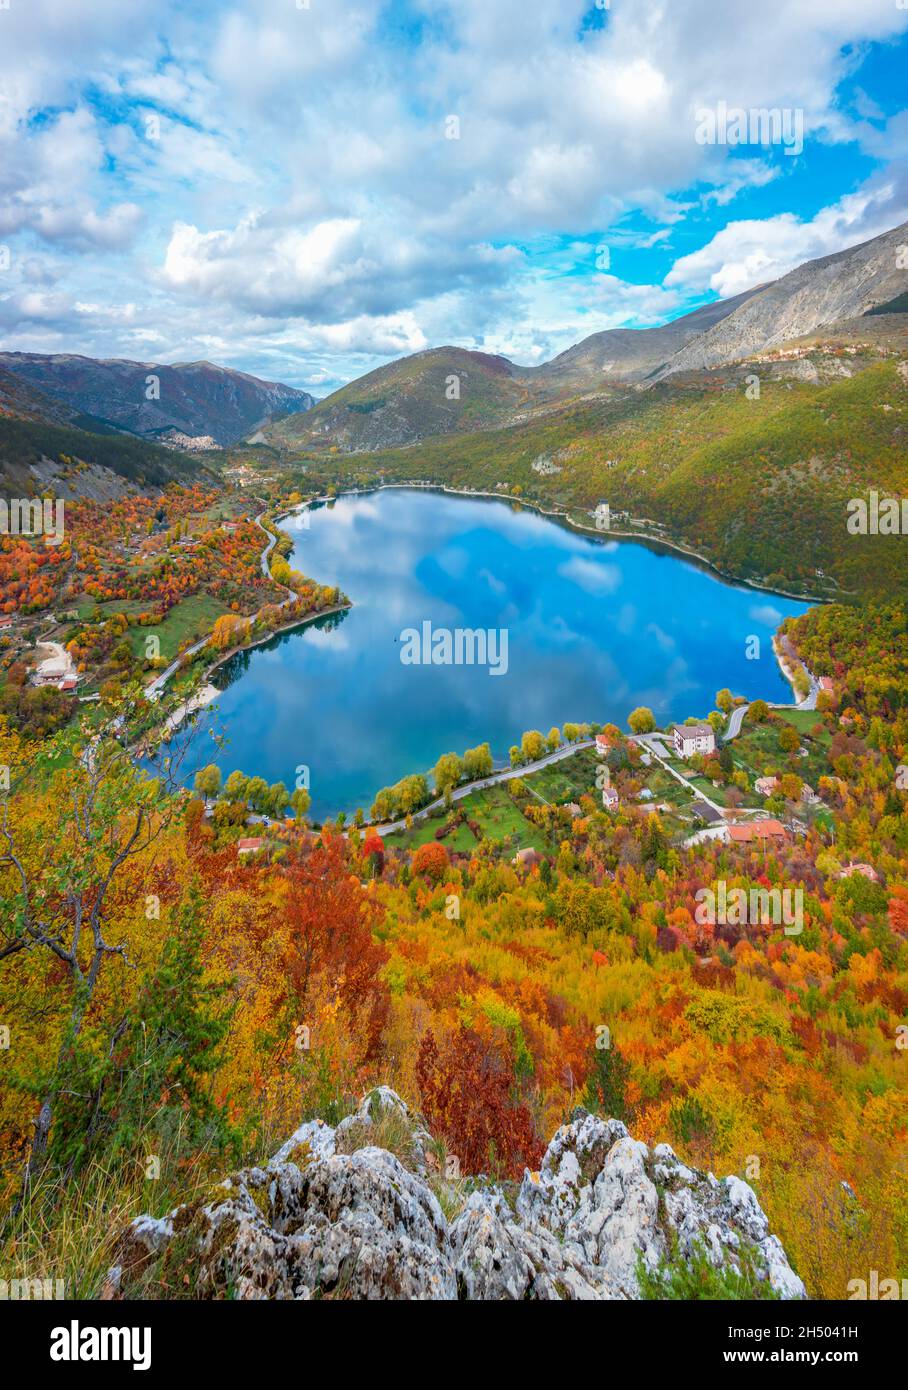 Lake Scanno (L'Aquila, Italy) - When nature is romantic: the heart - shaped lake on the Apennines mountains Abruzzo region, during the autumn foliage Stock Photo